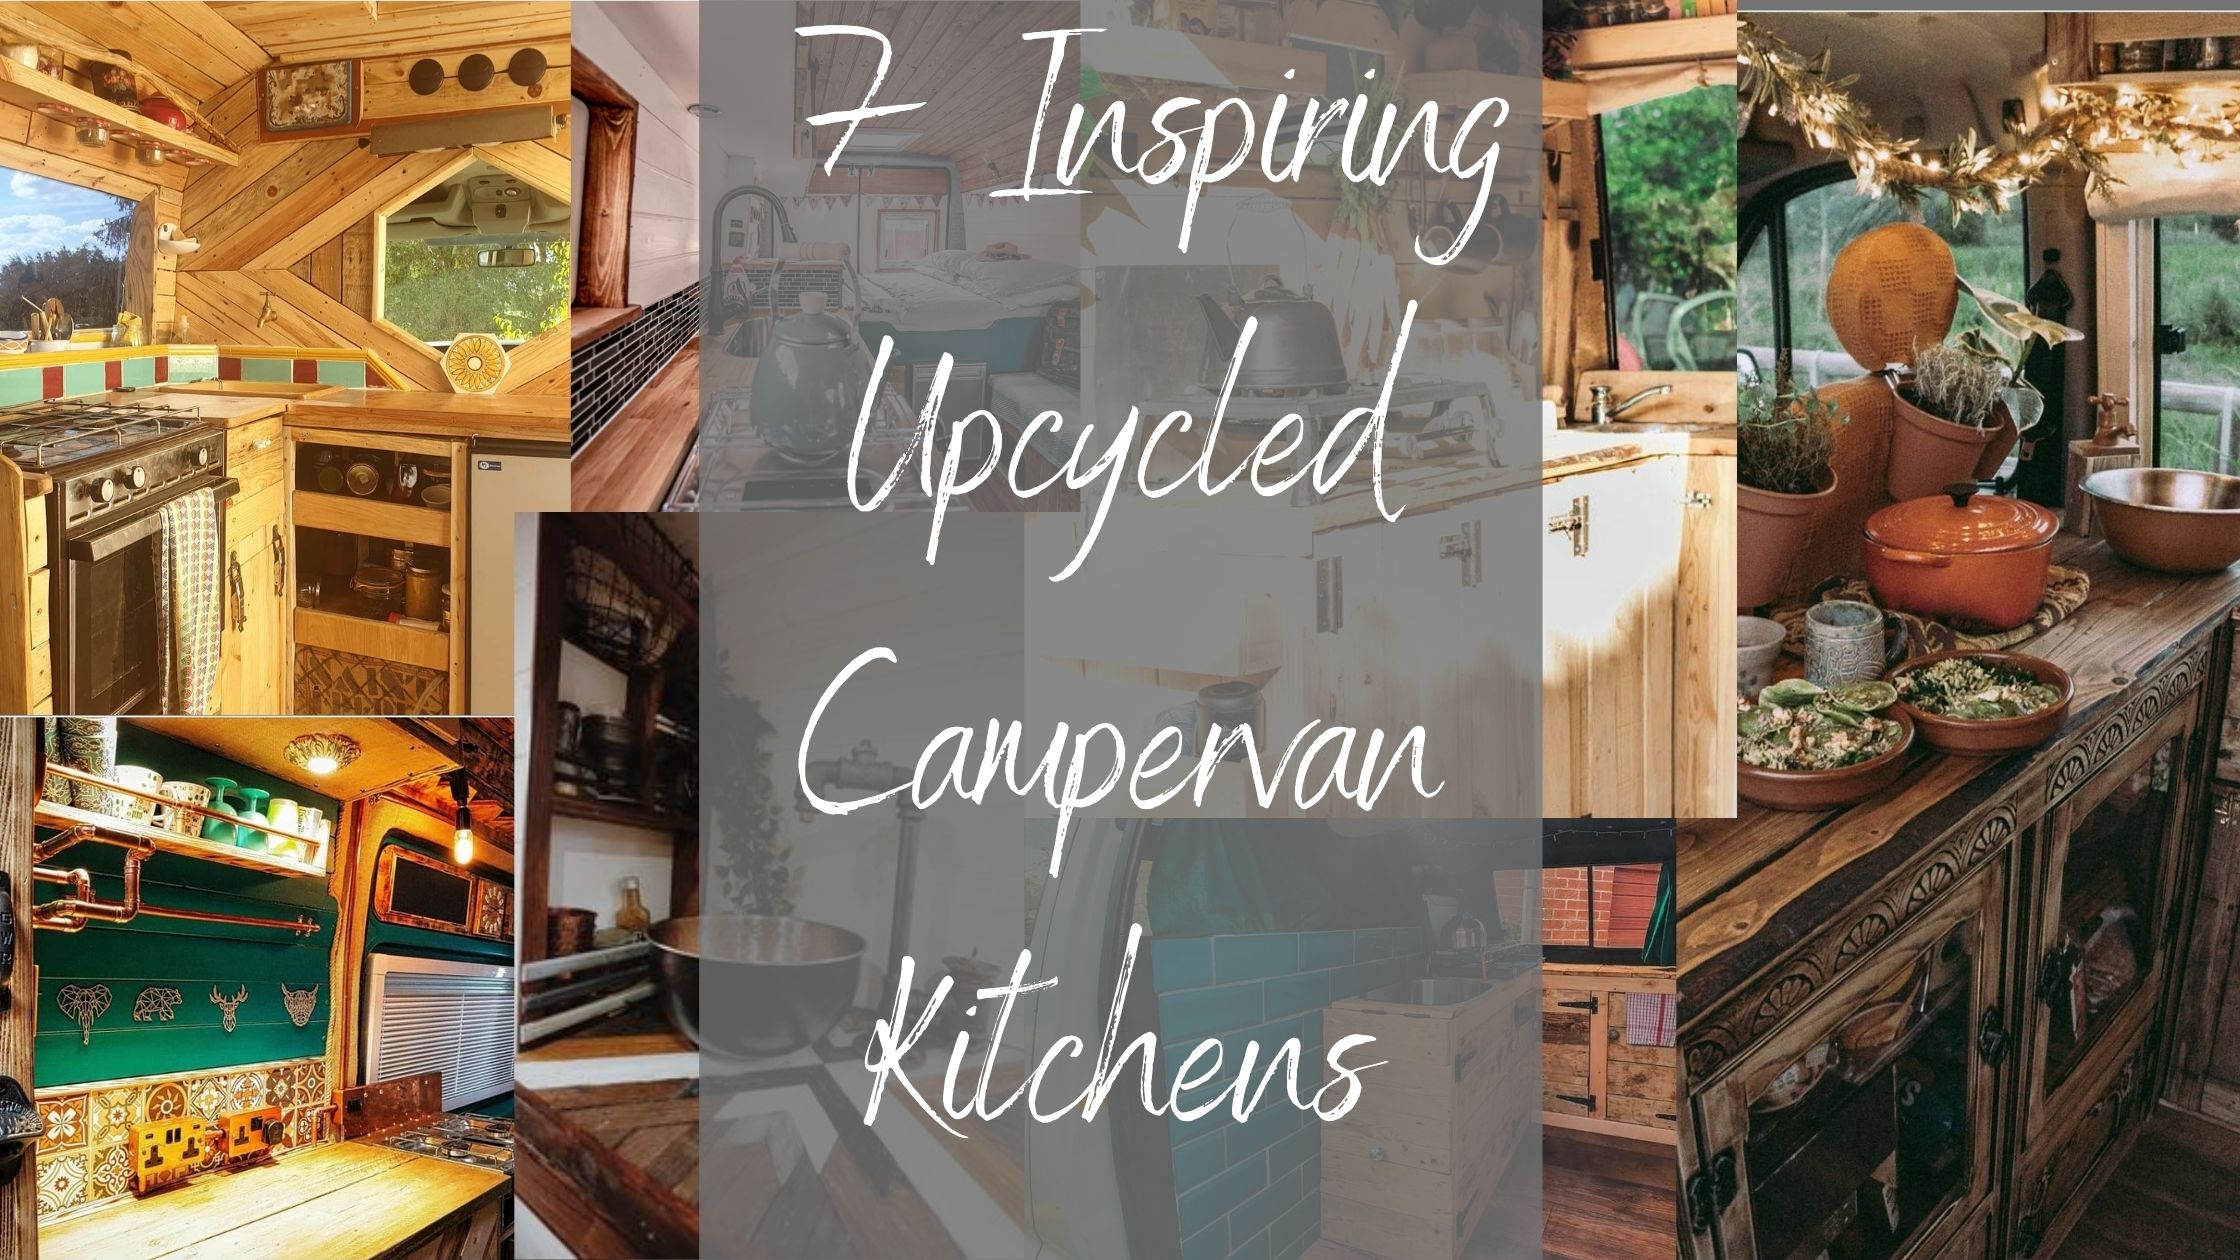 Upcycling Furniture - The Best Way to Build a Budget Campervan